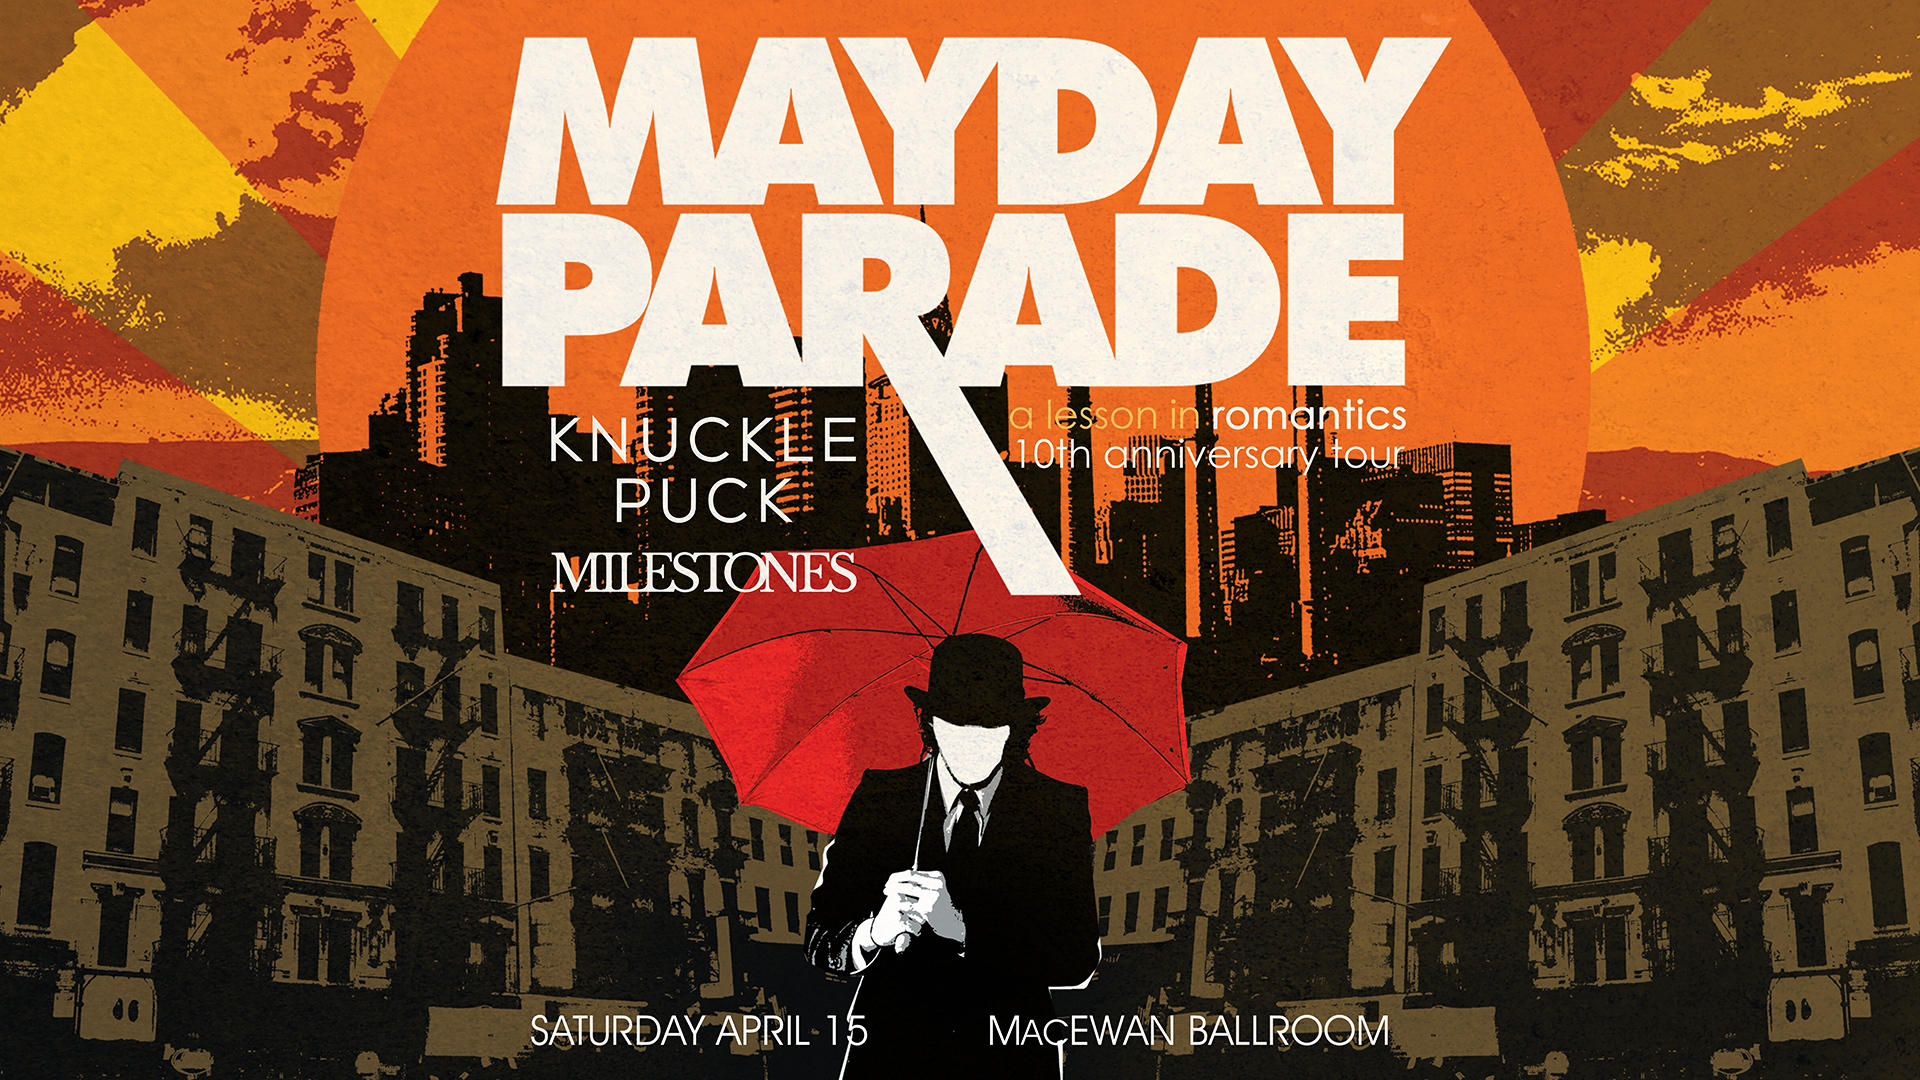 A Lesson In Romantics - Mayday Parade A Lesson In Romantics 10th Anniversary , HD Wallpaper & Backgrounds